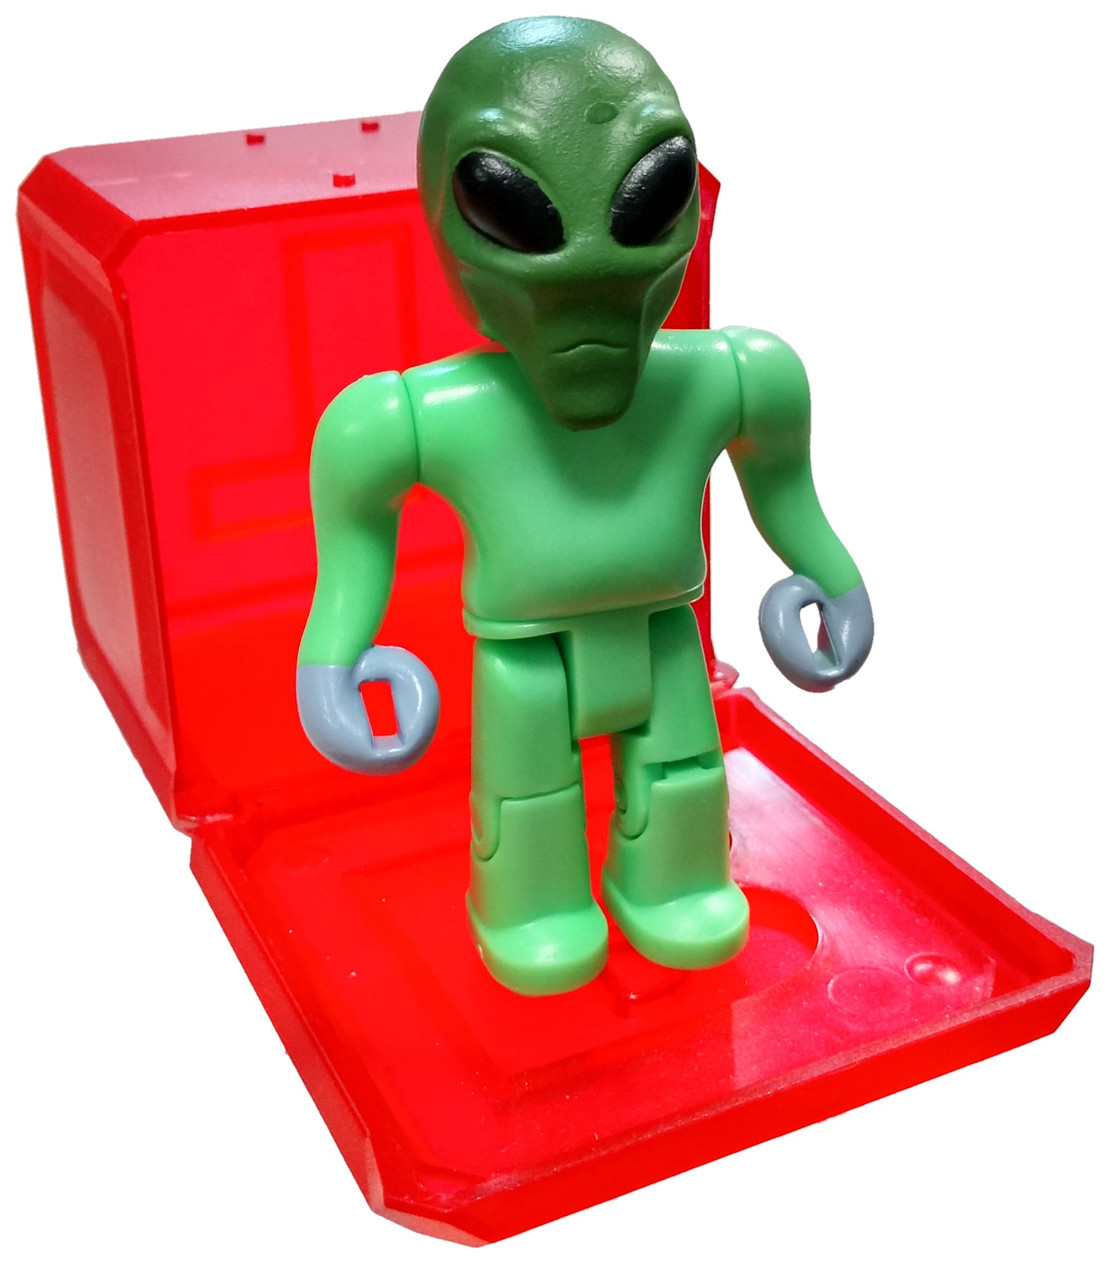 Roblox Celebrity Collection Series 5 Pinewood Alien 3 Mini Figure With Red Cube And Online Code Loose Jazwares Toywiz - alien egg of goo and slime roblox